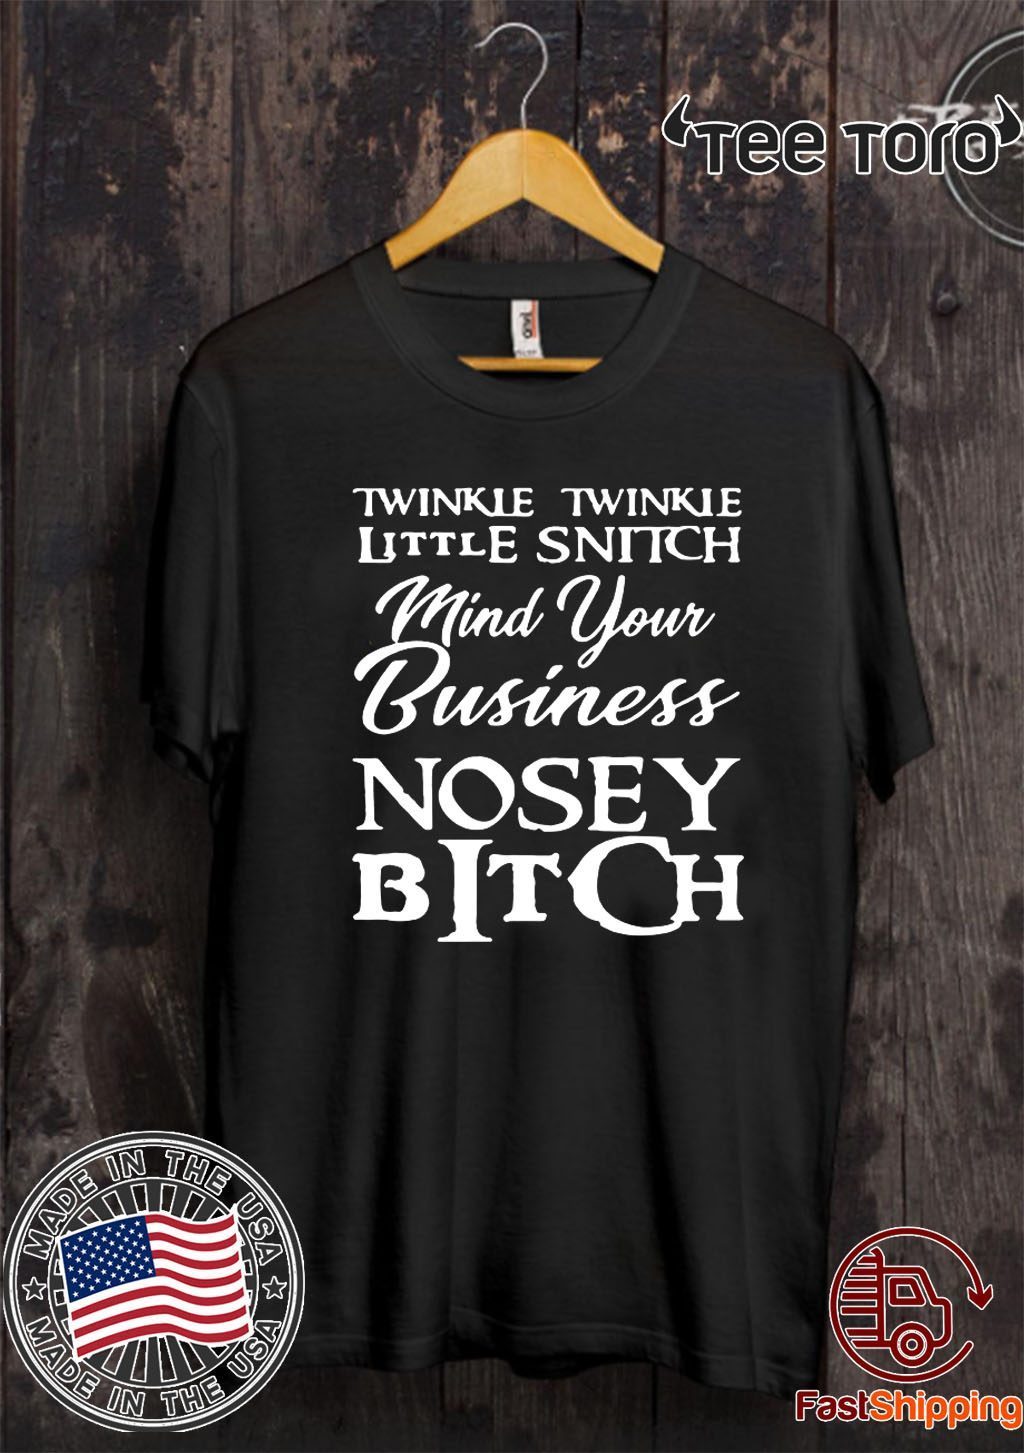 Twinkle twinkle little snitch mind your own business nosey bitch Shirt ...